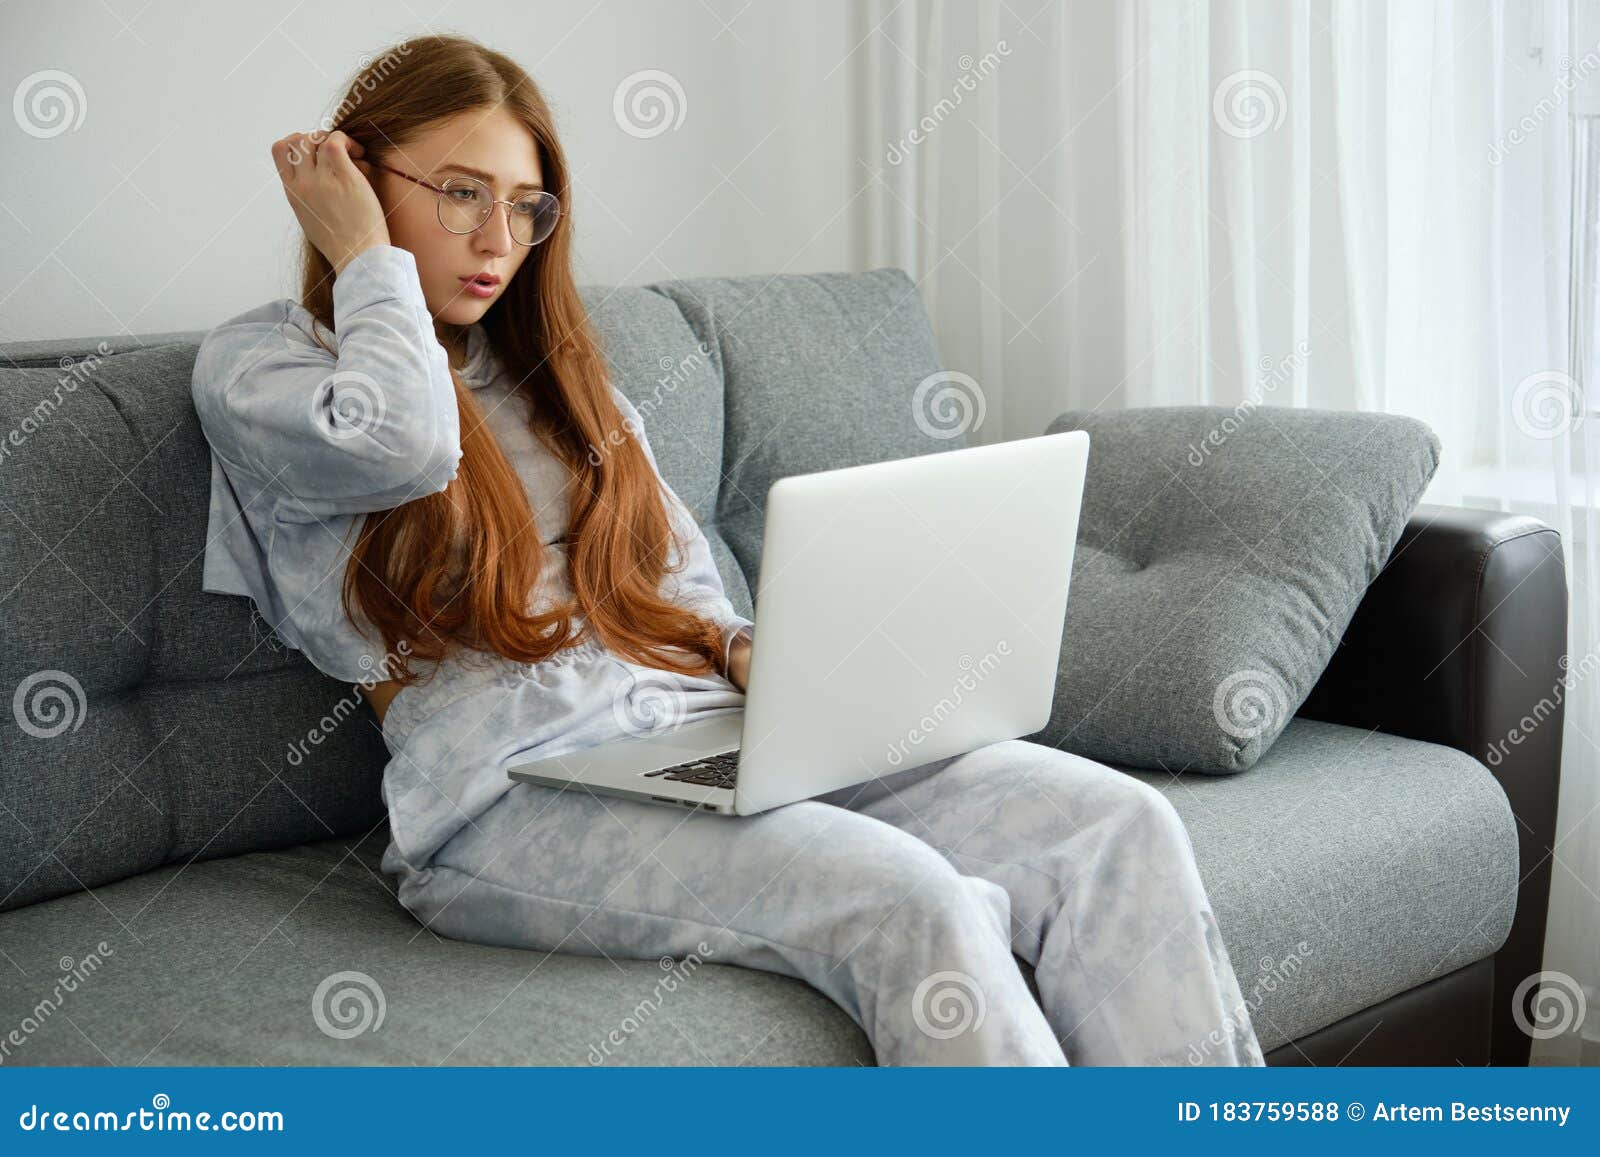 Redhead Girl In Pajamas And Glasses Sits On A Sofa With A Laptop